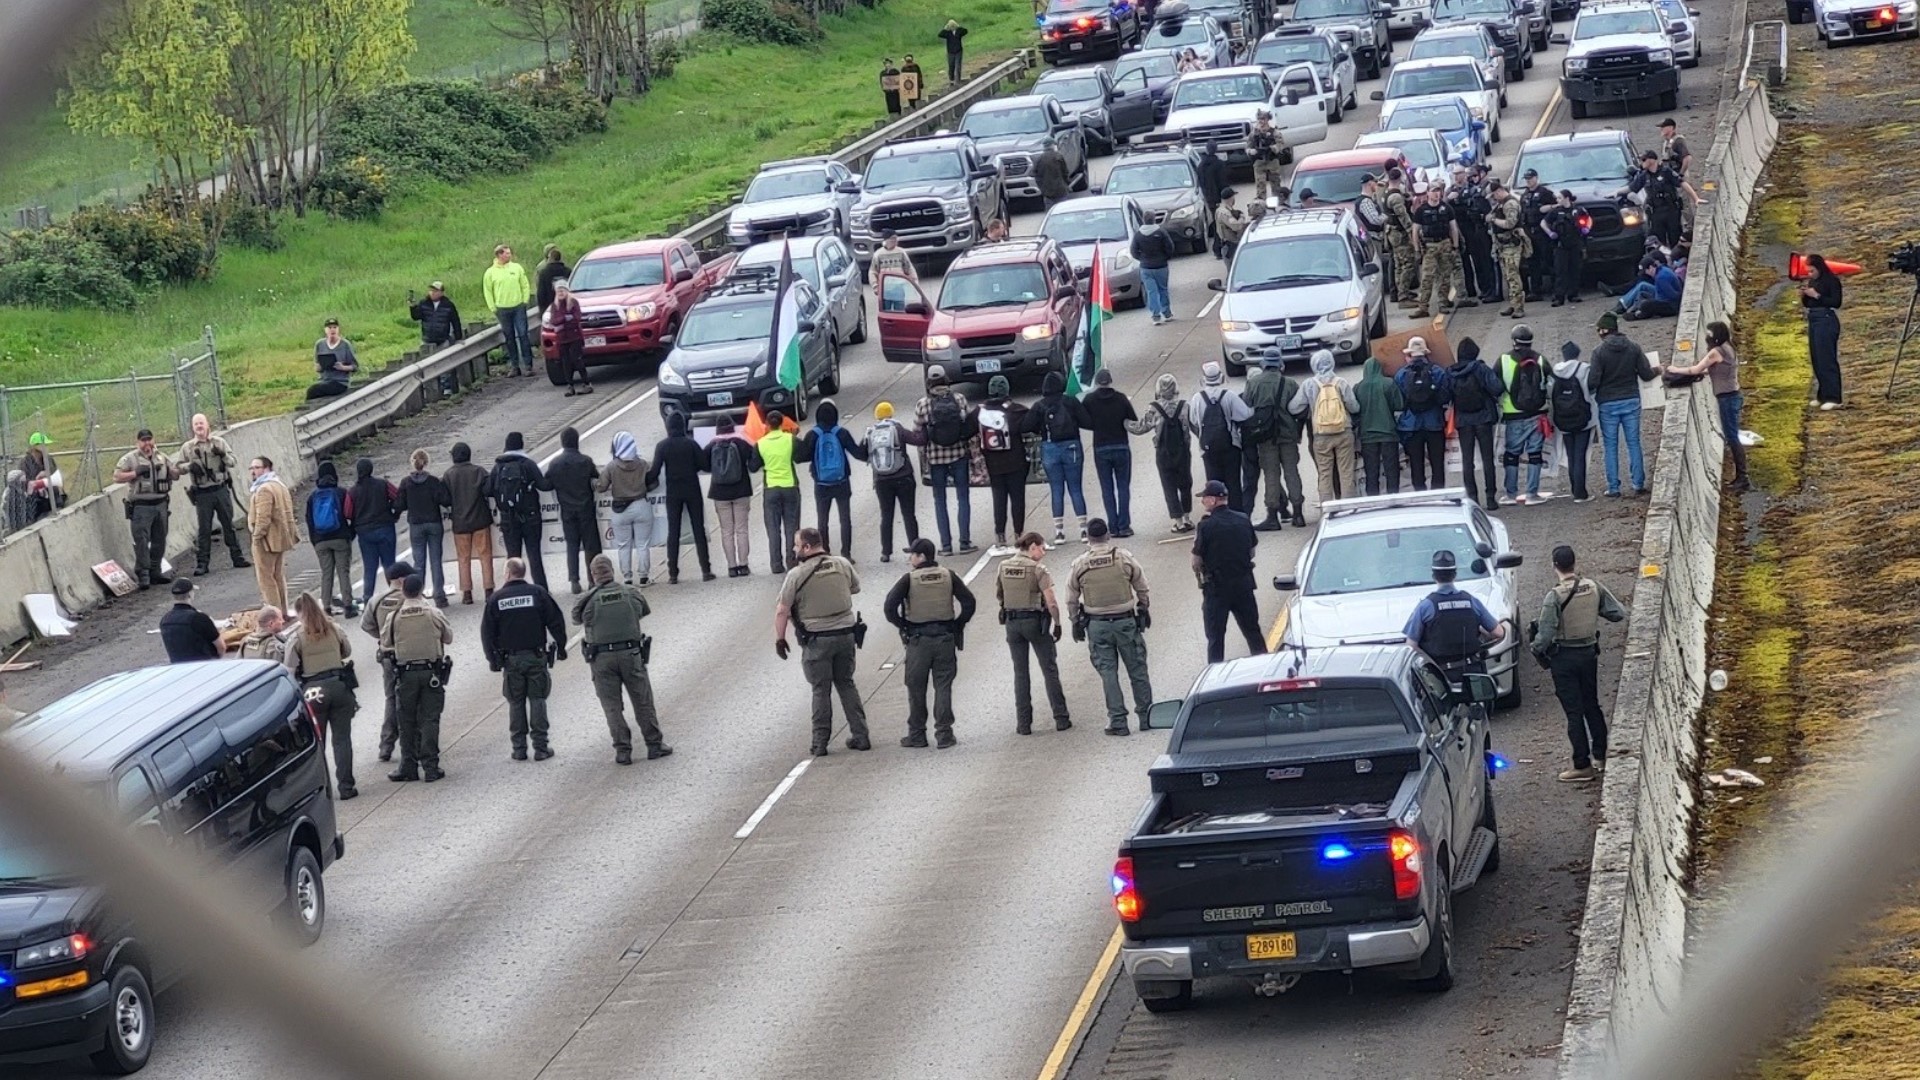 A protest outside Intel's campus in Hillsboro called for a ceasefire in Gaza. In Eugene, 52 people were arrested after protesters blocked I-5's southbound lanes.